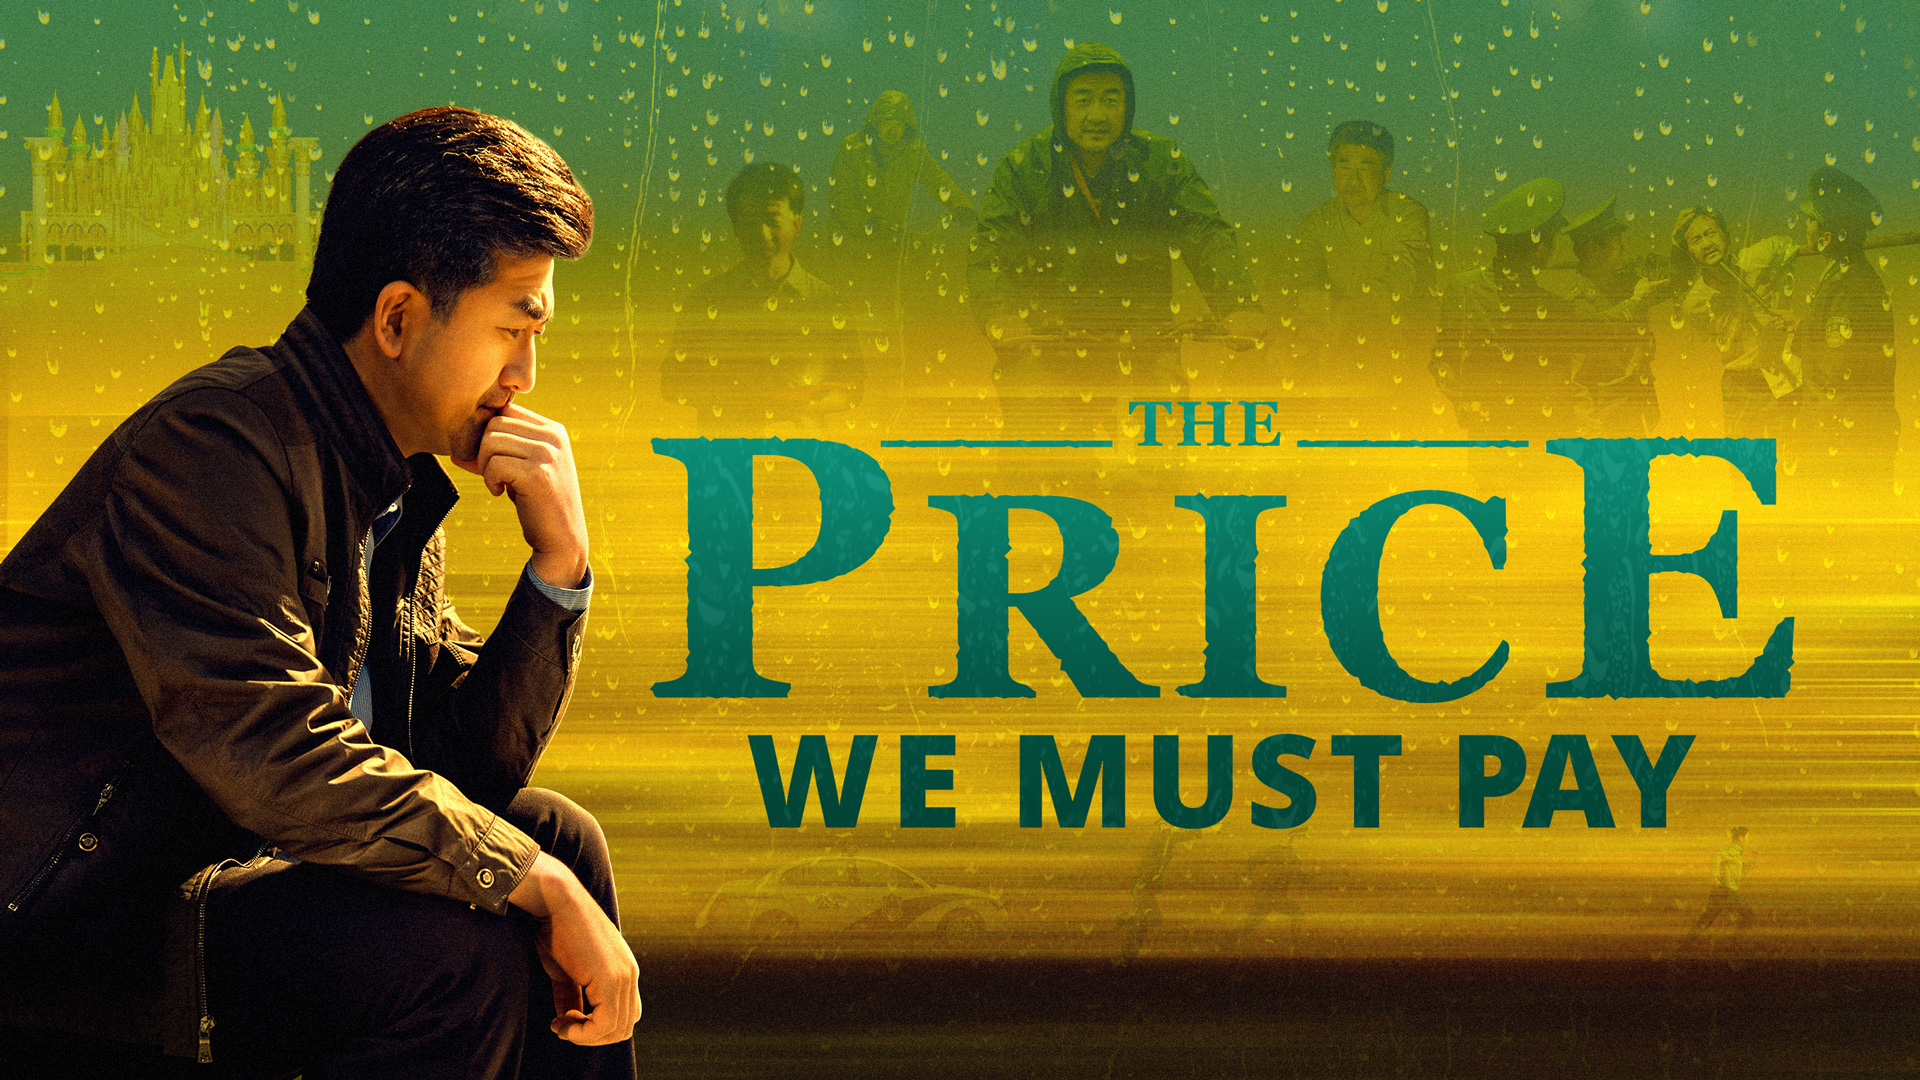 Best Full Christian Movie "The Price We Must Pay" The True ...